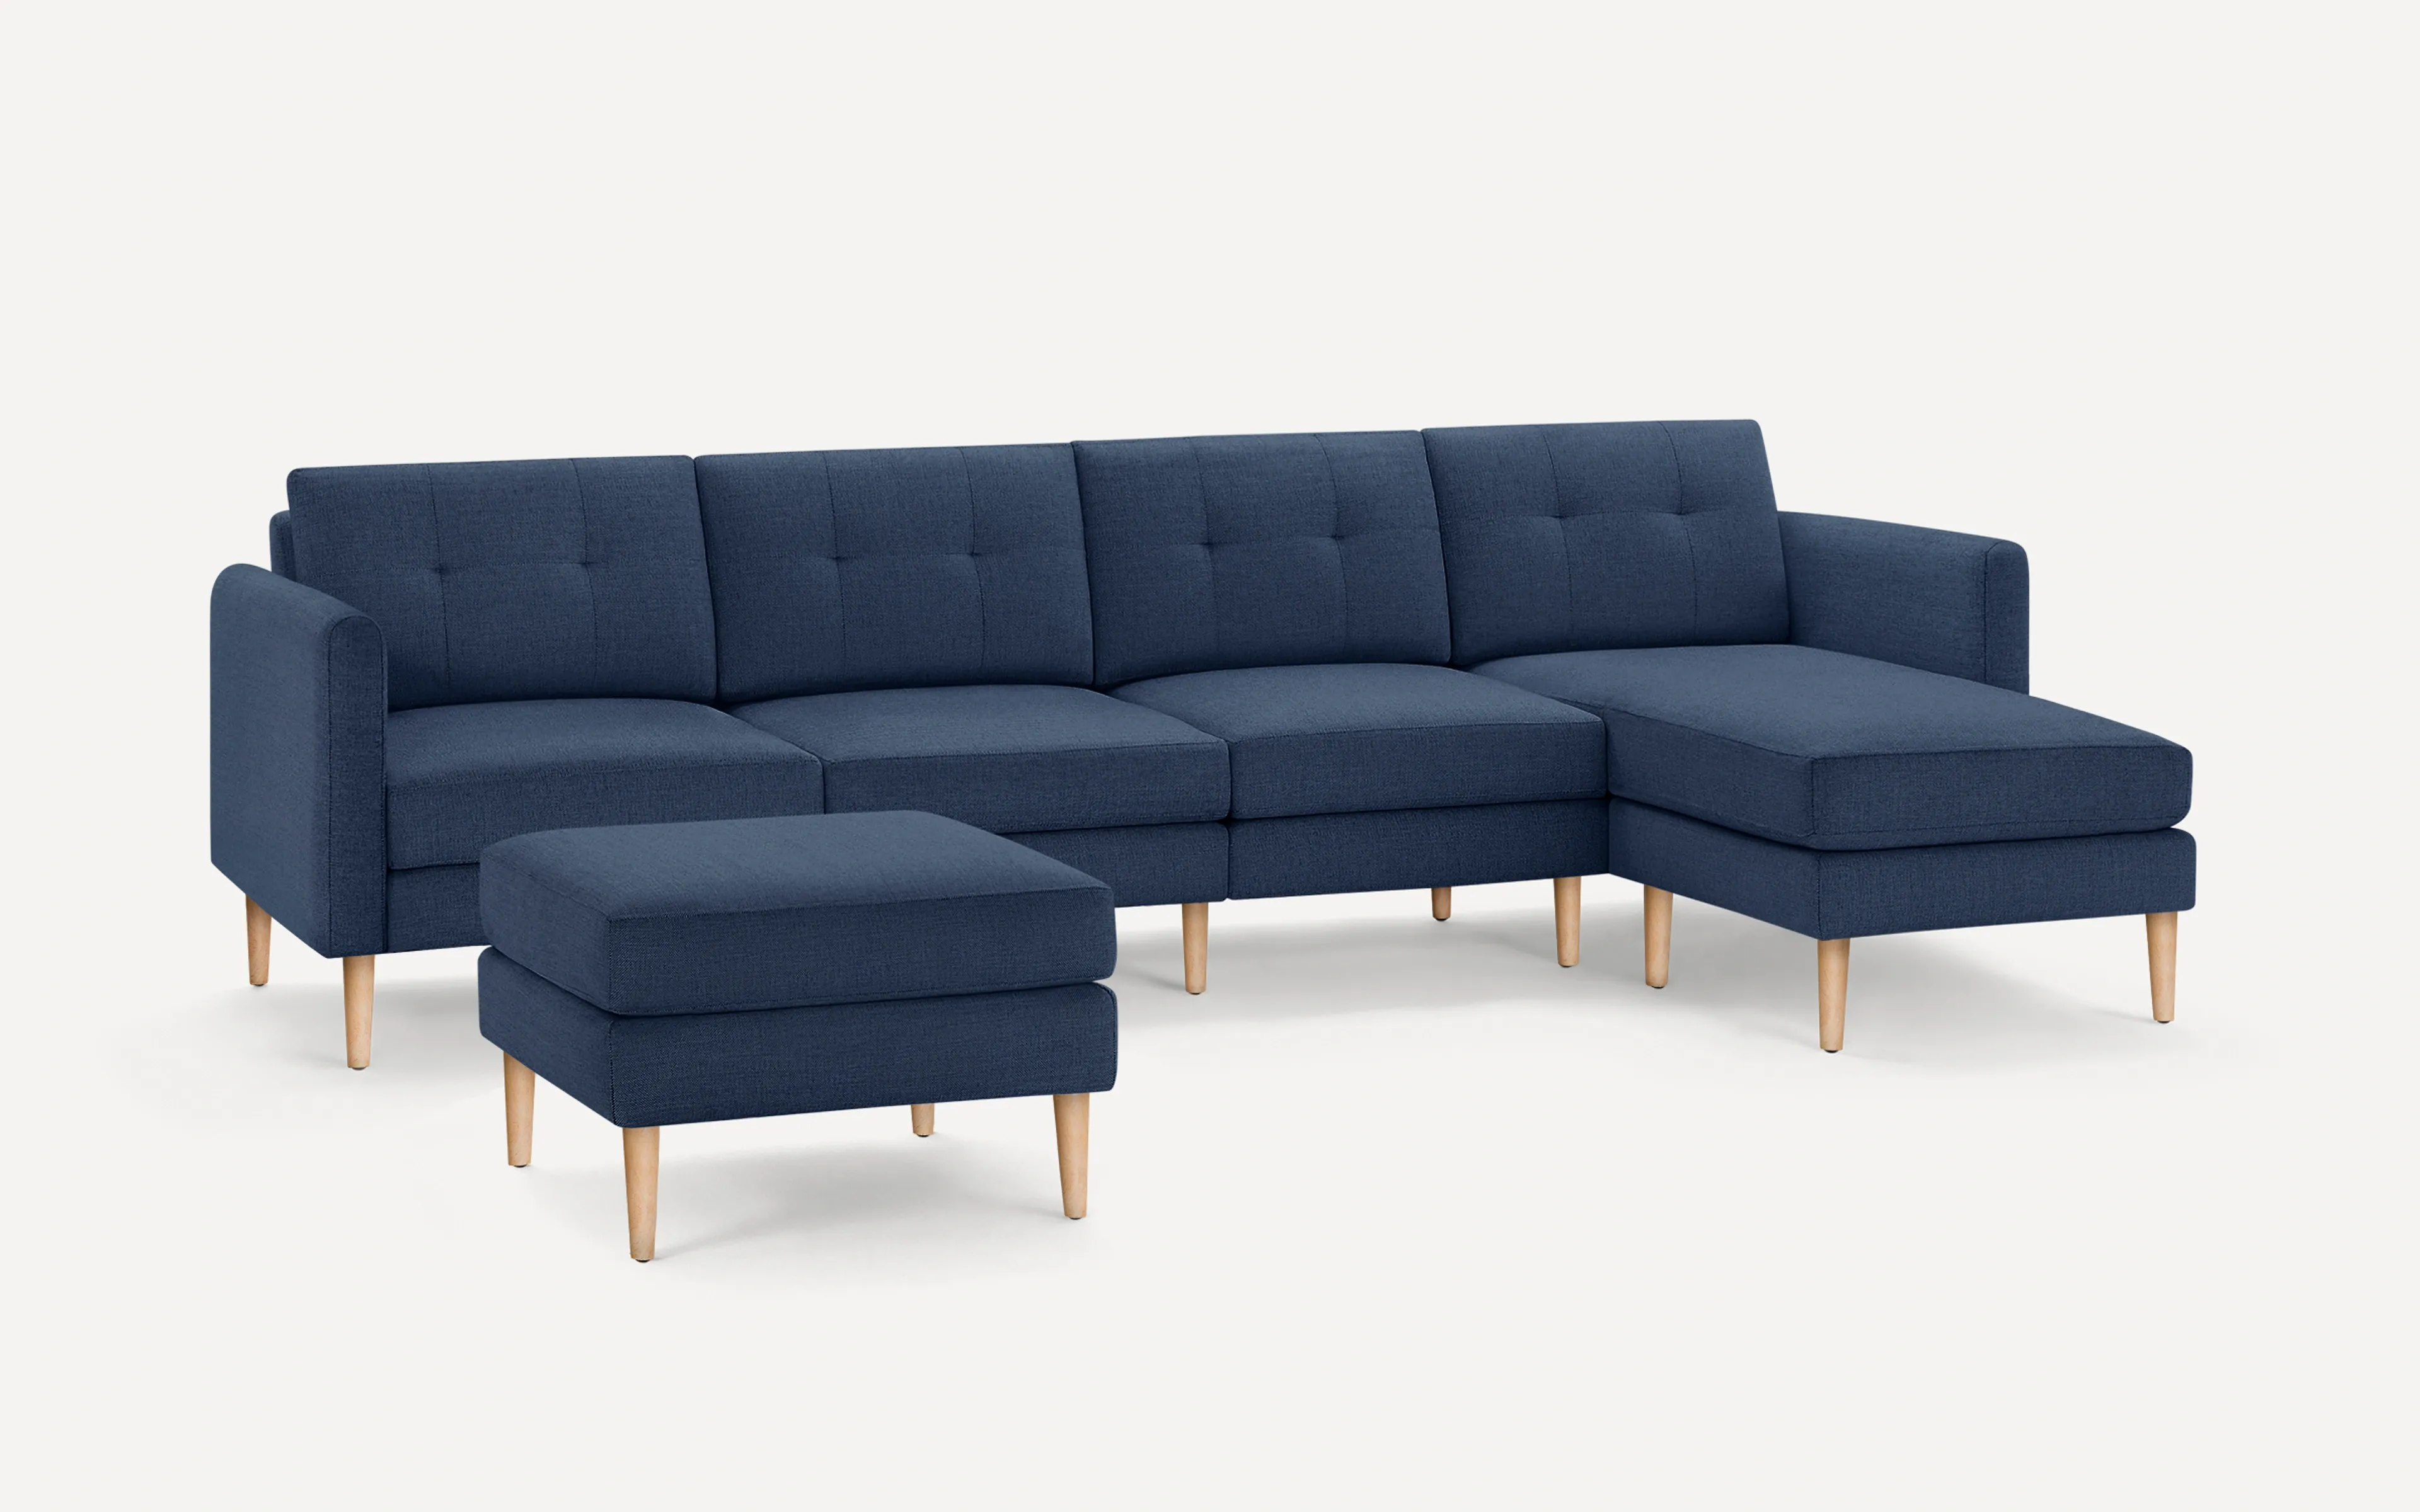 Original Nomad Chaise King Sofa in Navy Blue Fabric